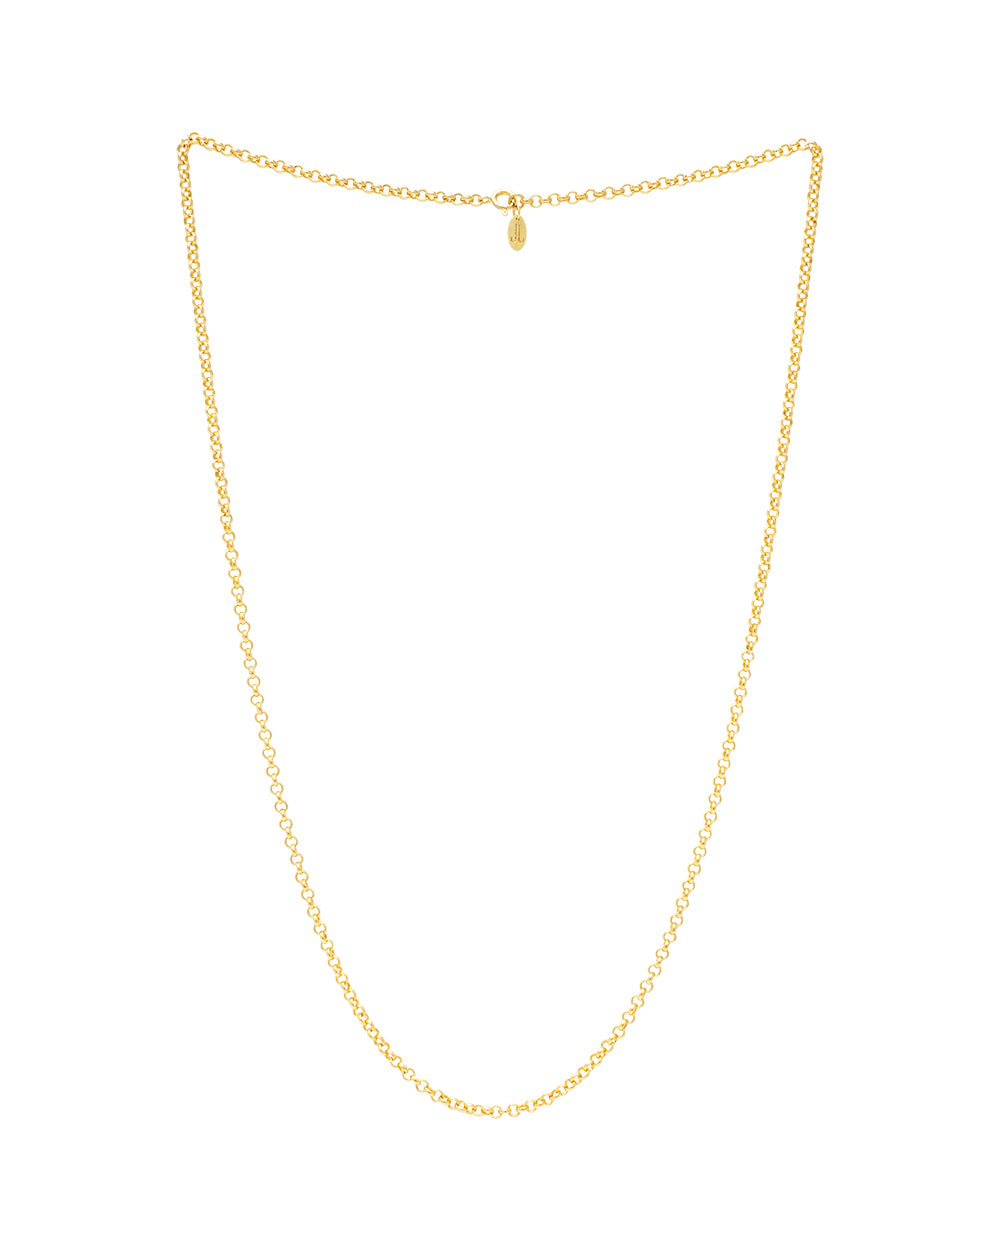 K20 Roller weaving necklace made of brass plated with 24K gold / length 75-90 cm